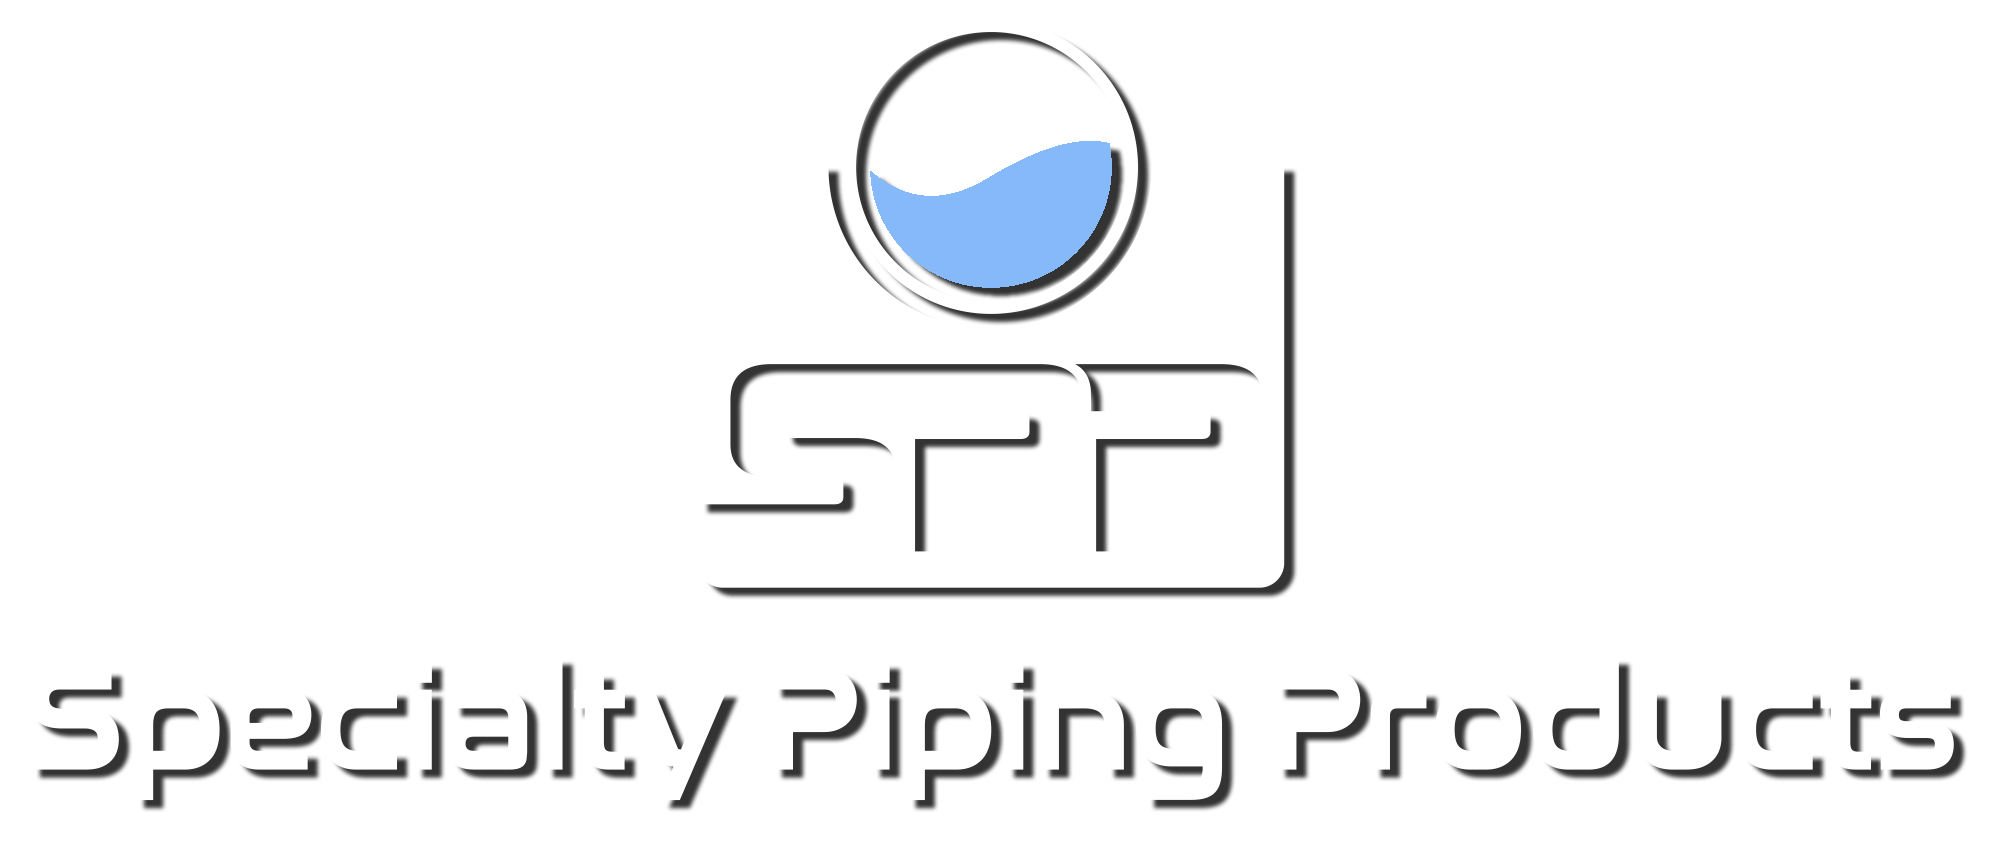 Specialty-Piping-Products-LOGO-LARGE-Shadow